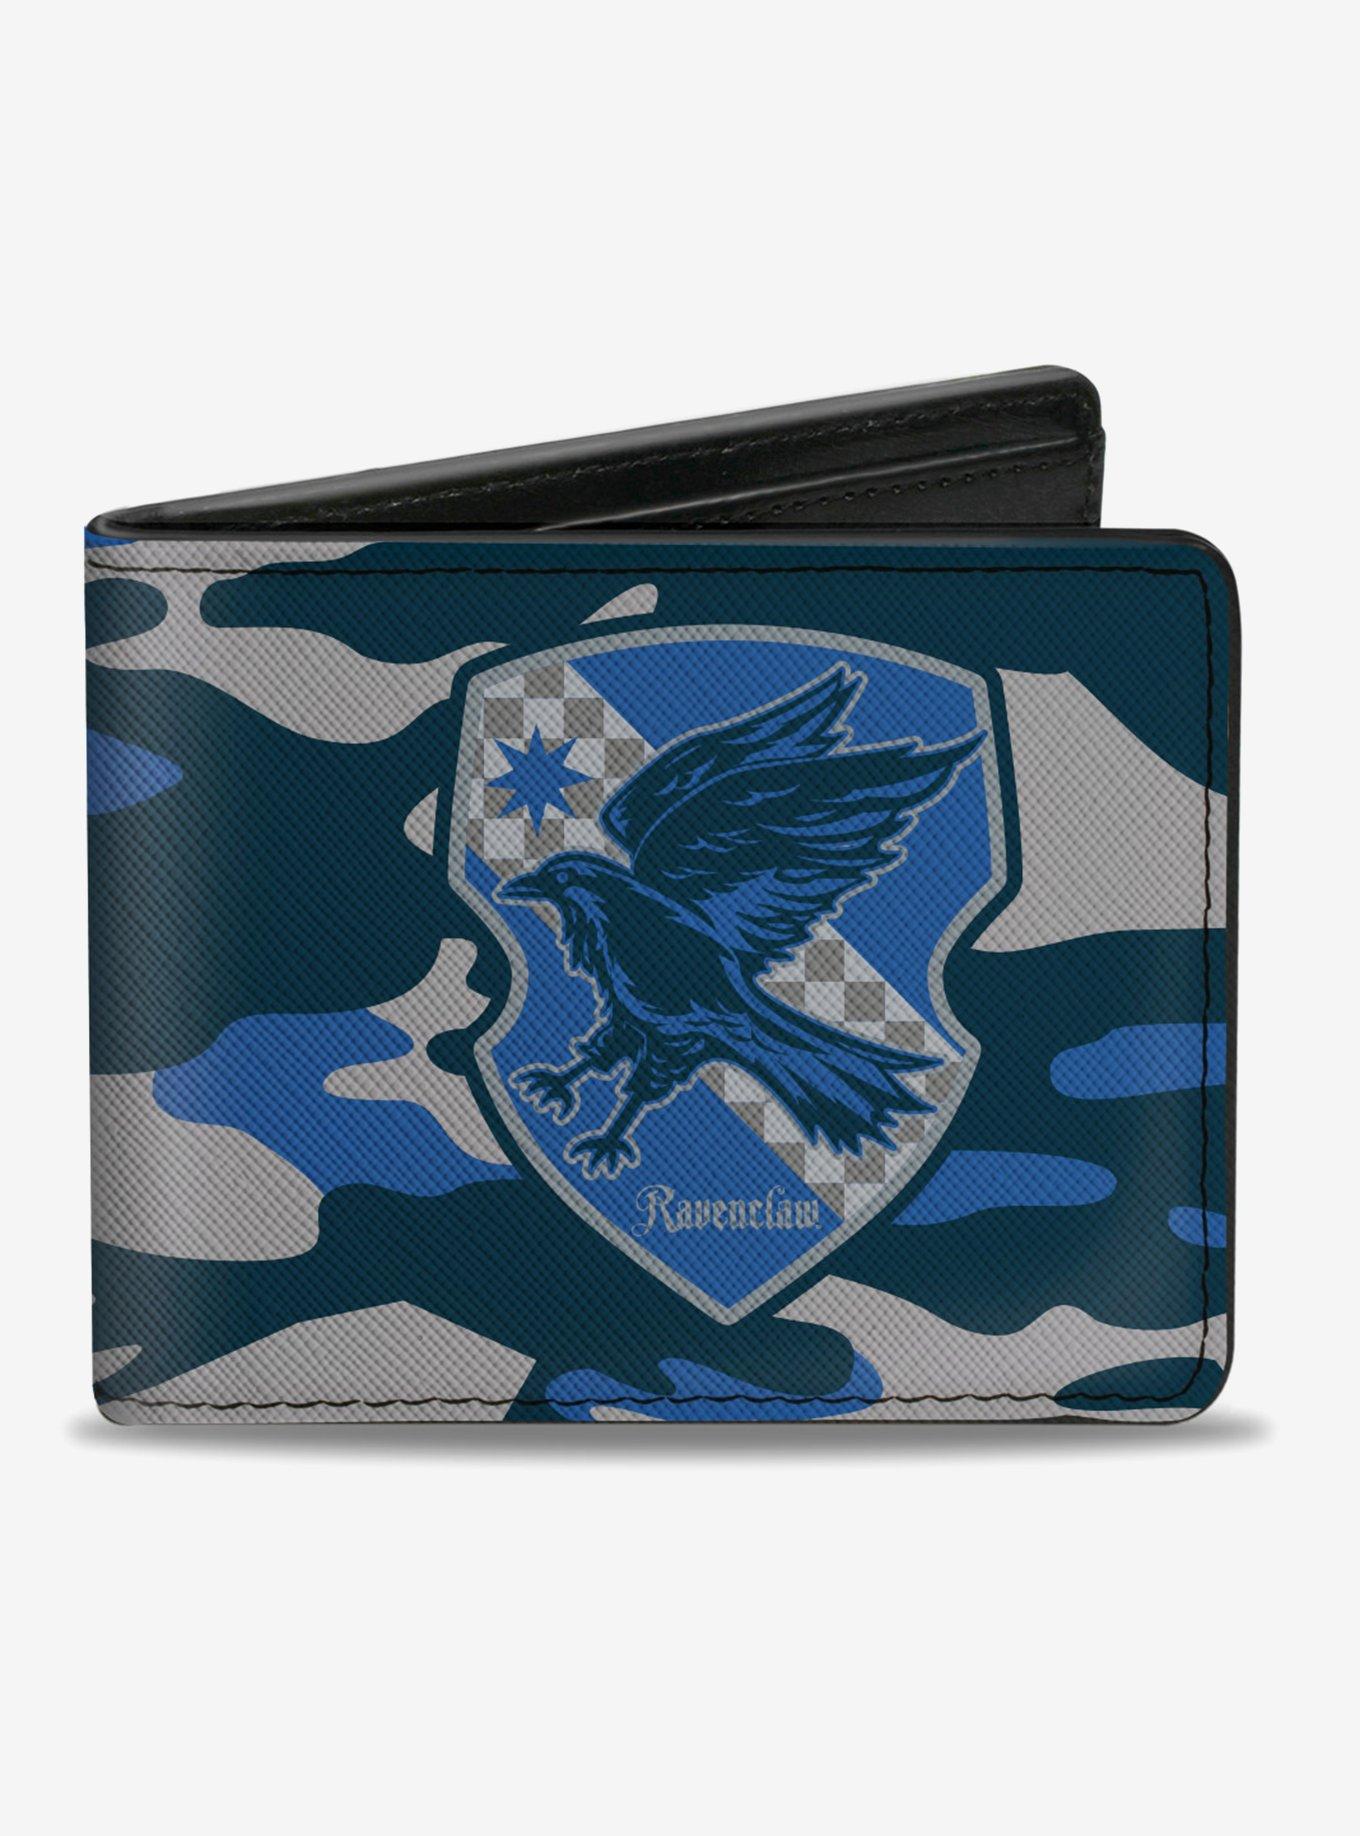 Boxed Official Harry Potter Ravenclaw Sports Style Black Bi-Fold Wallet